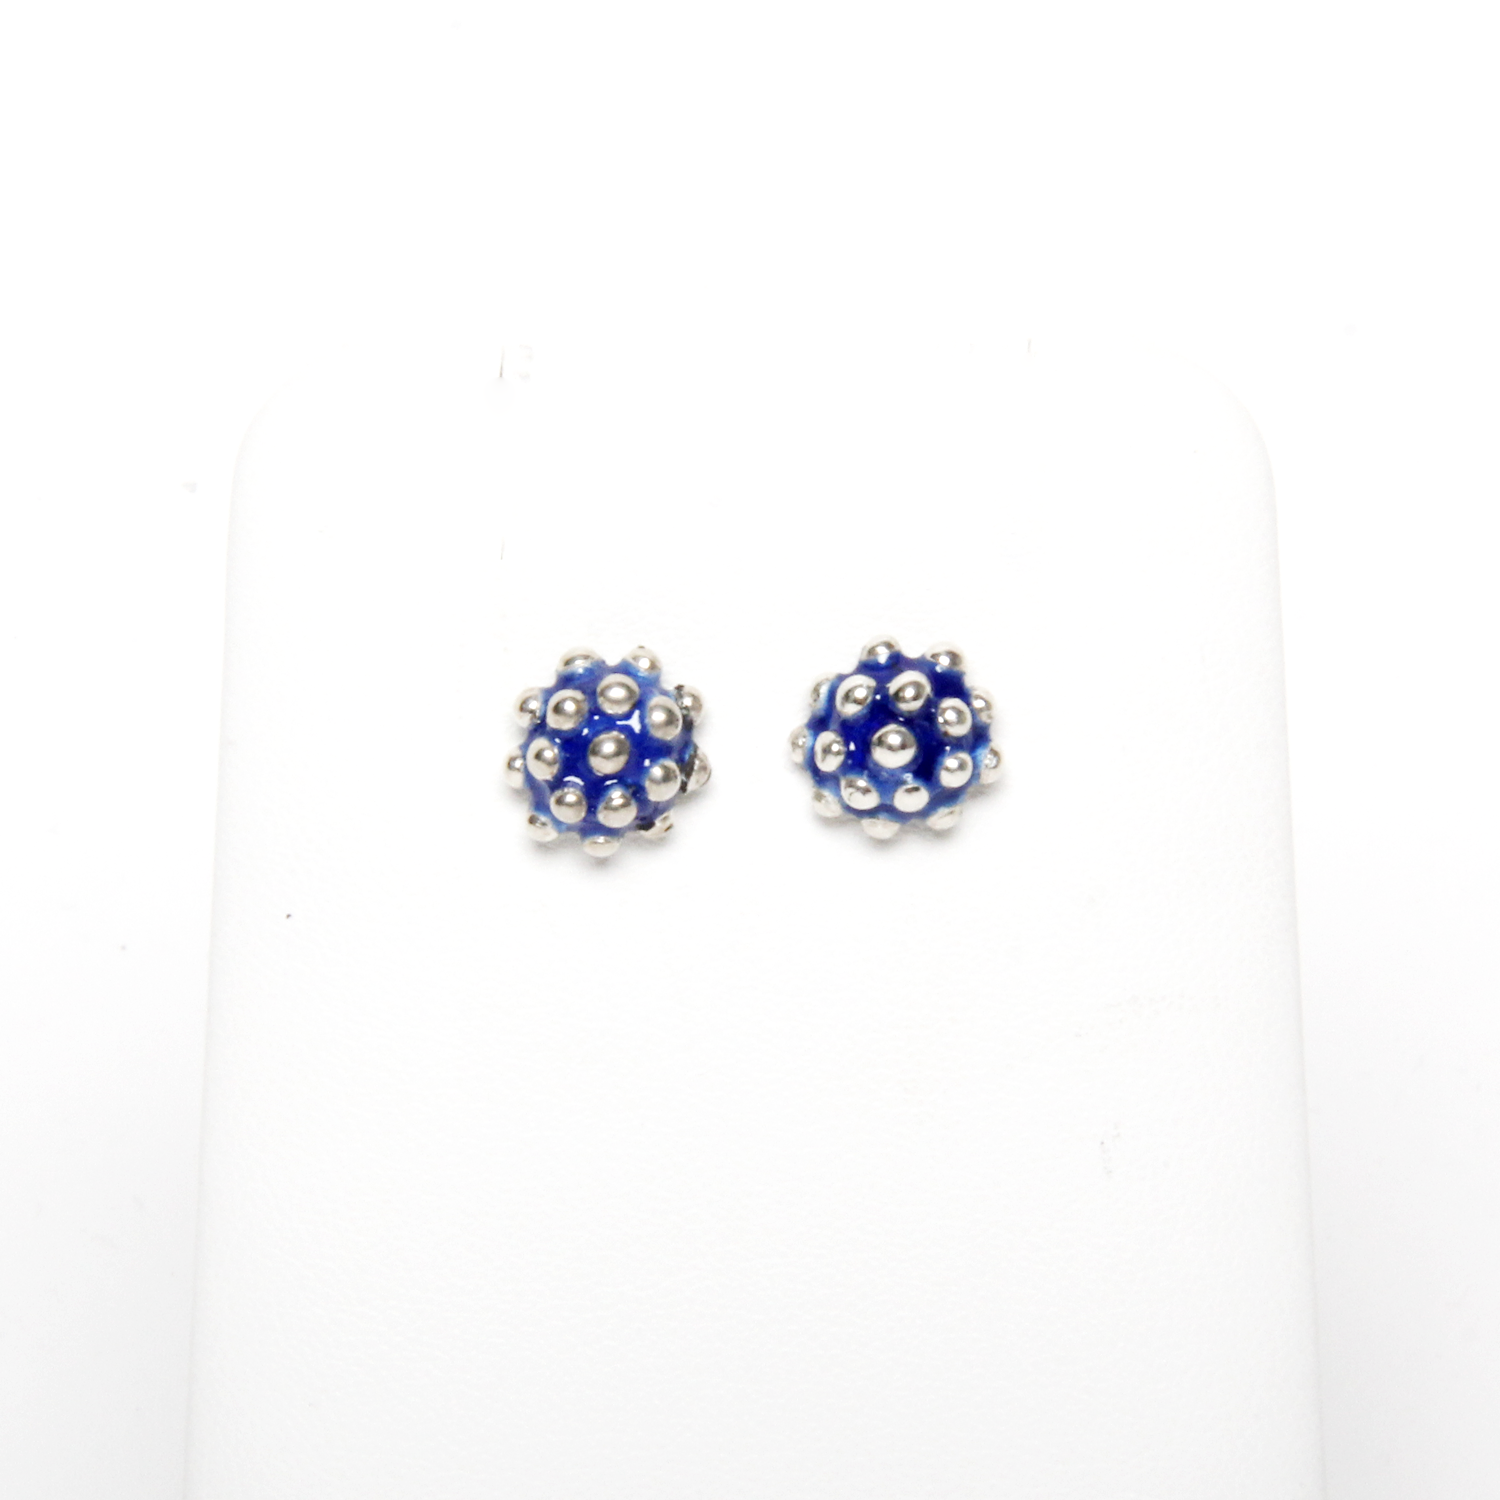 Cinelli Maillet: Mini Blowfish Earrings in Nitric Product Image 2 of 2